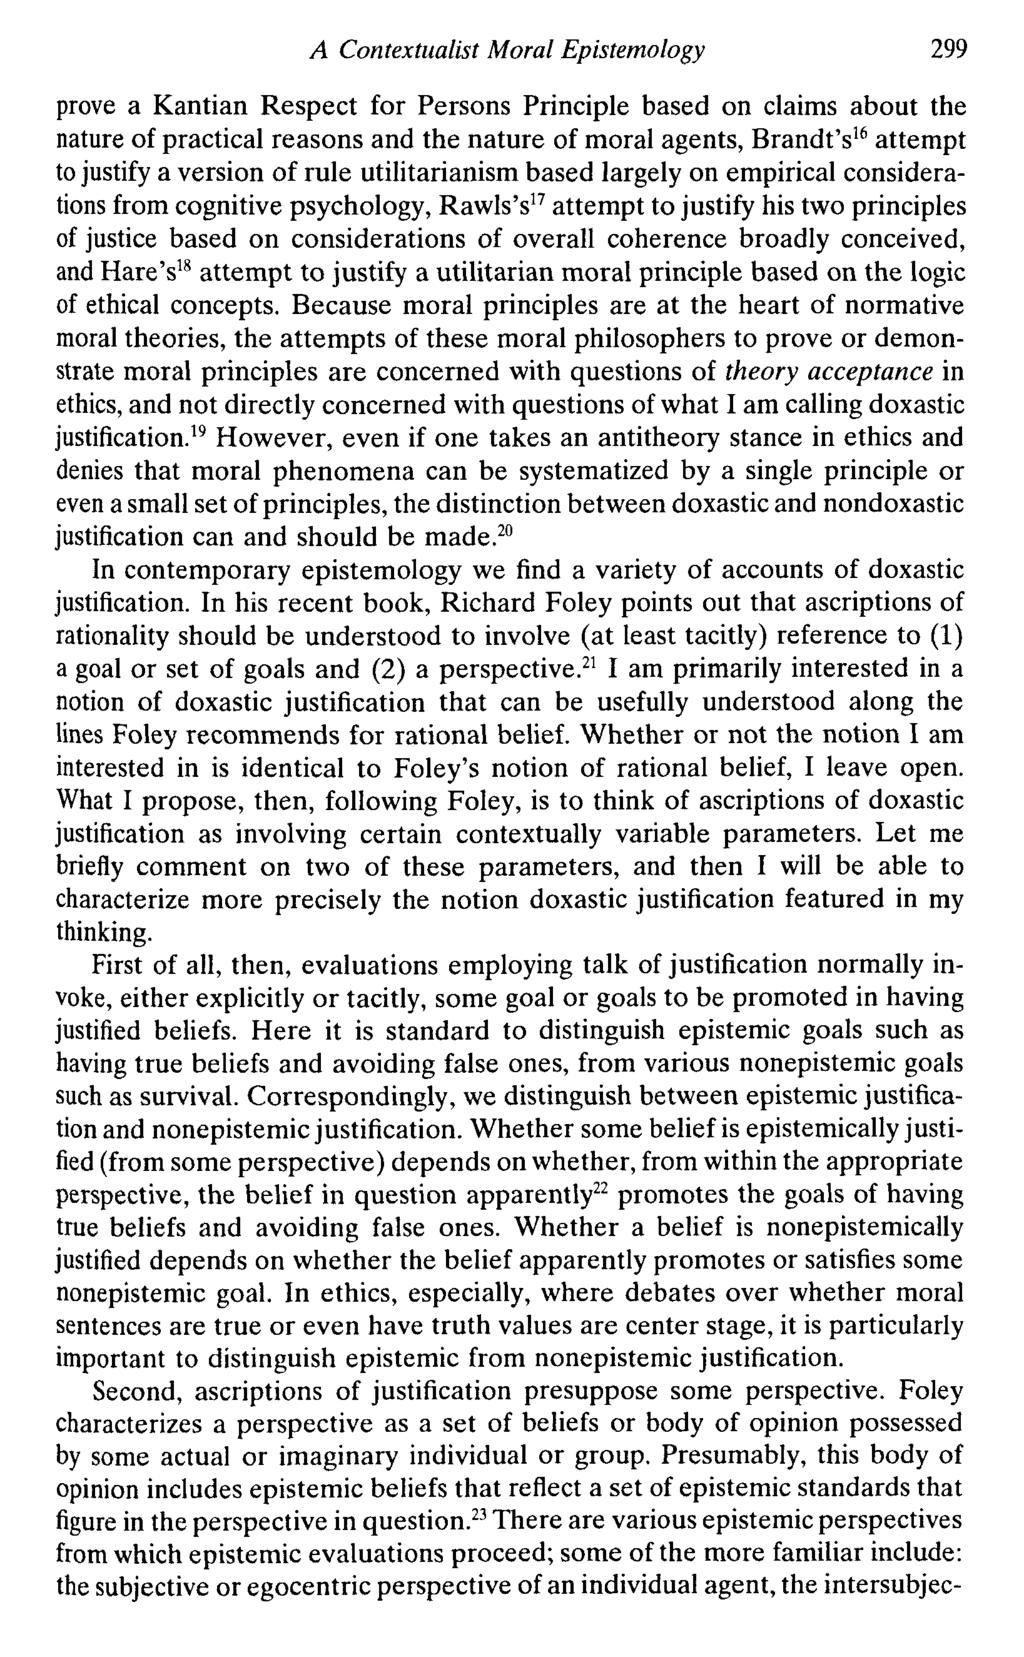 A Contextualist Moral Epistemology 299 prove a Kantian Respect for Persons Principle based on claims about the nature of practical reasons and the nature of moral agents, Brandt's16 attempt to